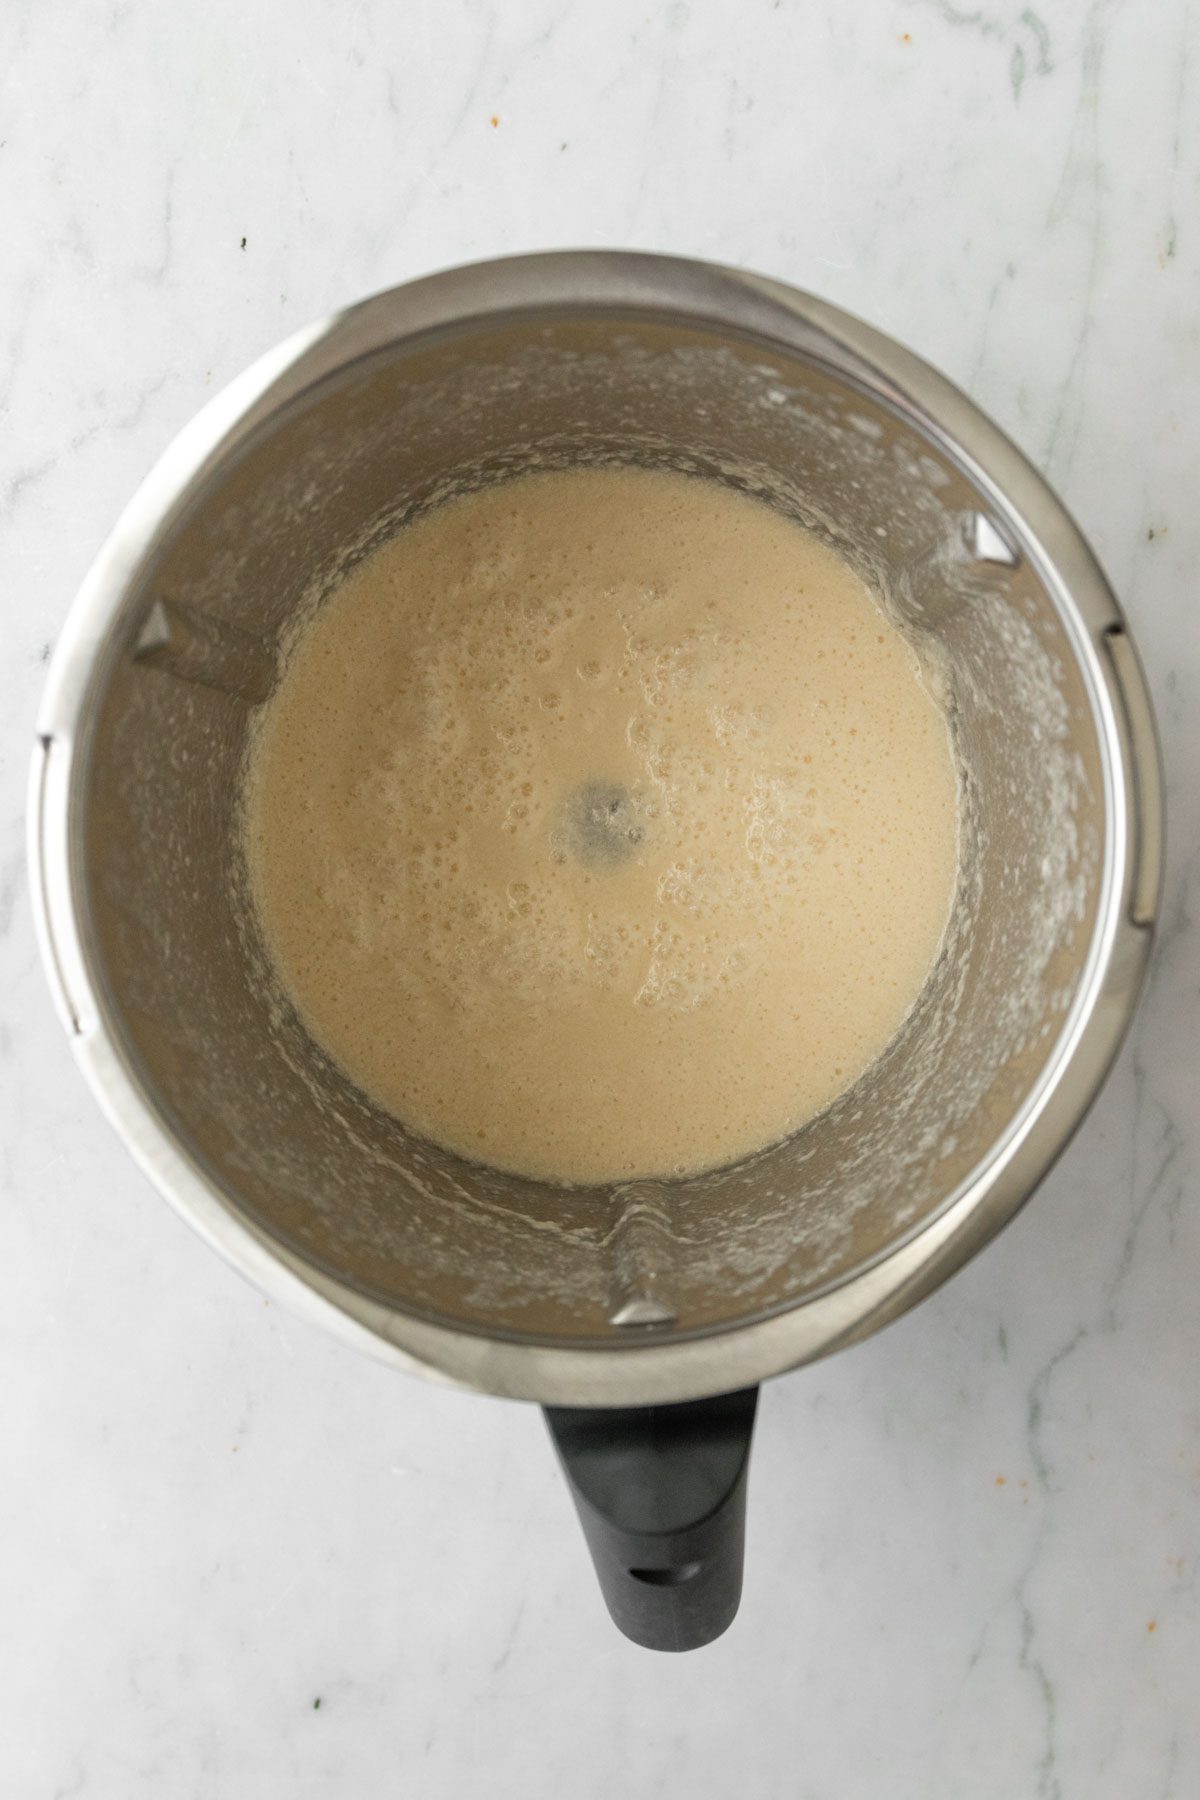 a Thermomix mixing bowl with muffin batter inside